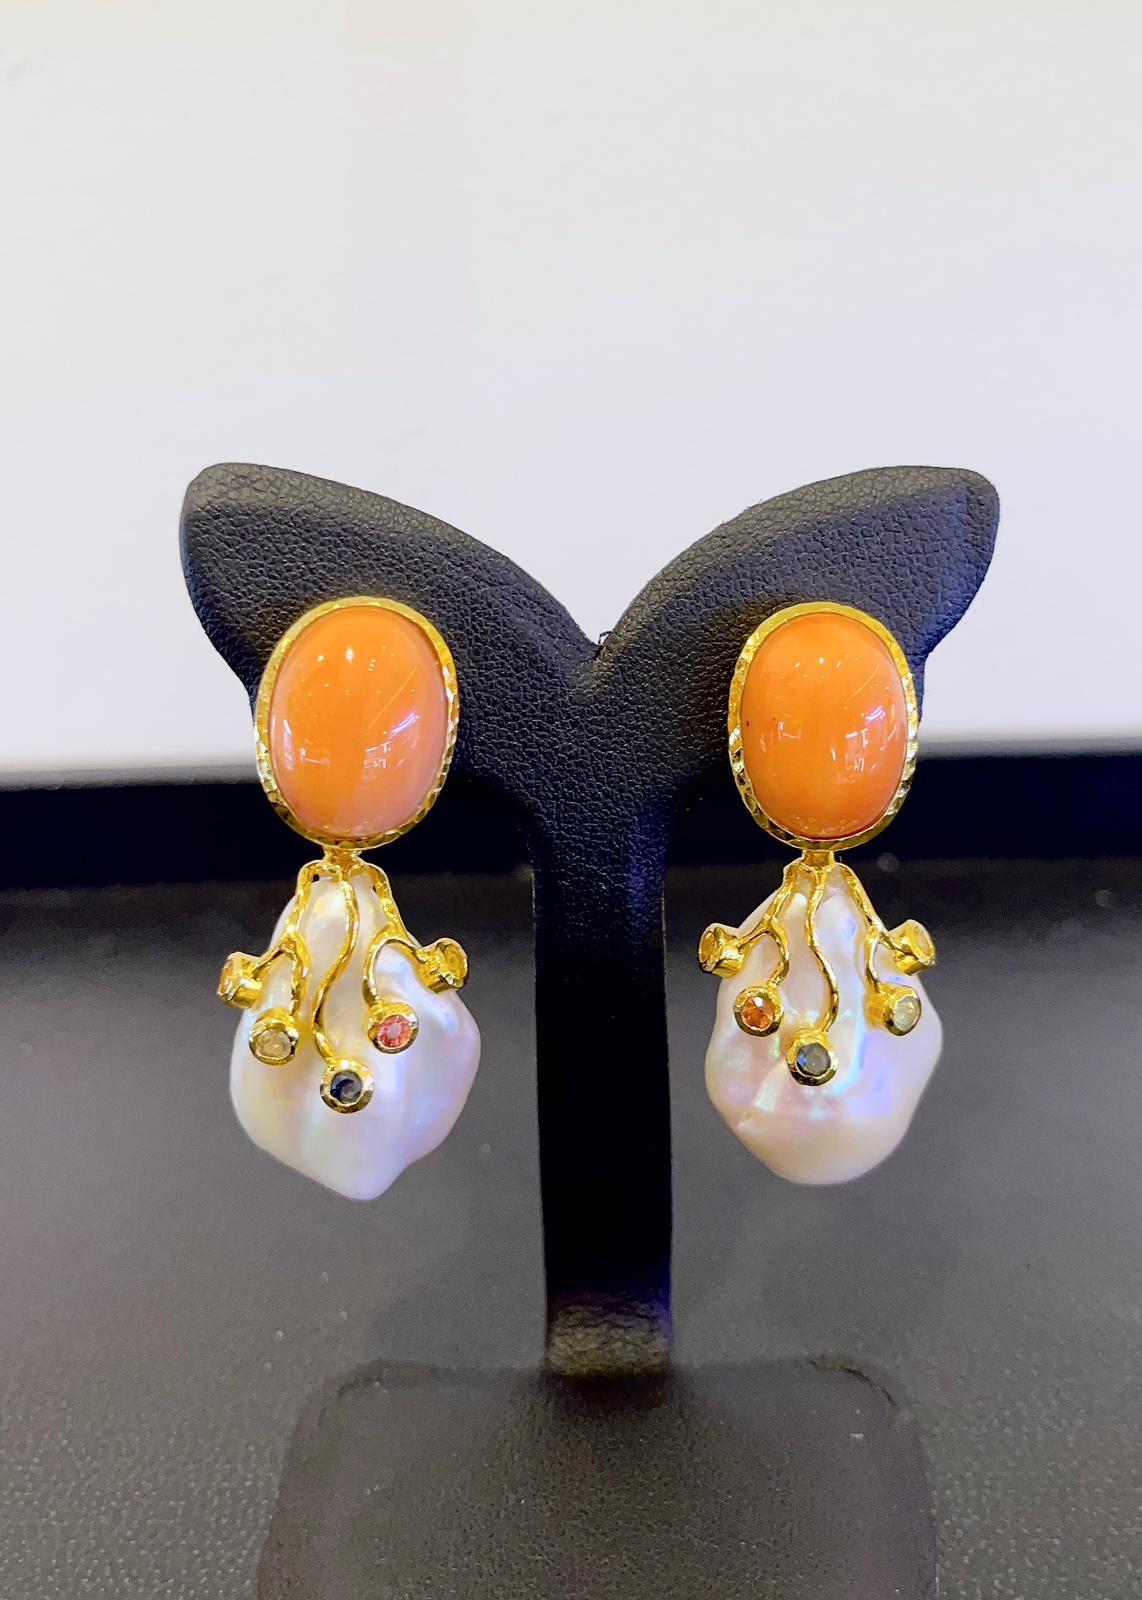 Bochic “Capri” Salmon Coral & Fancy Color Sapphire Earrings Set 18K Gold&Silver
Drop earrings 
The coral is presses salmon coral 
Fancy color Natural, Blue, Pink, Yellow and Red Sapphires 
1.00 Carat 
Set in 18K Gold and Silver 
The earrings from